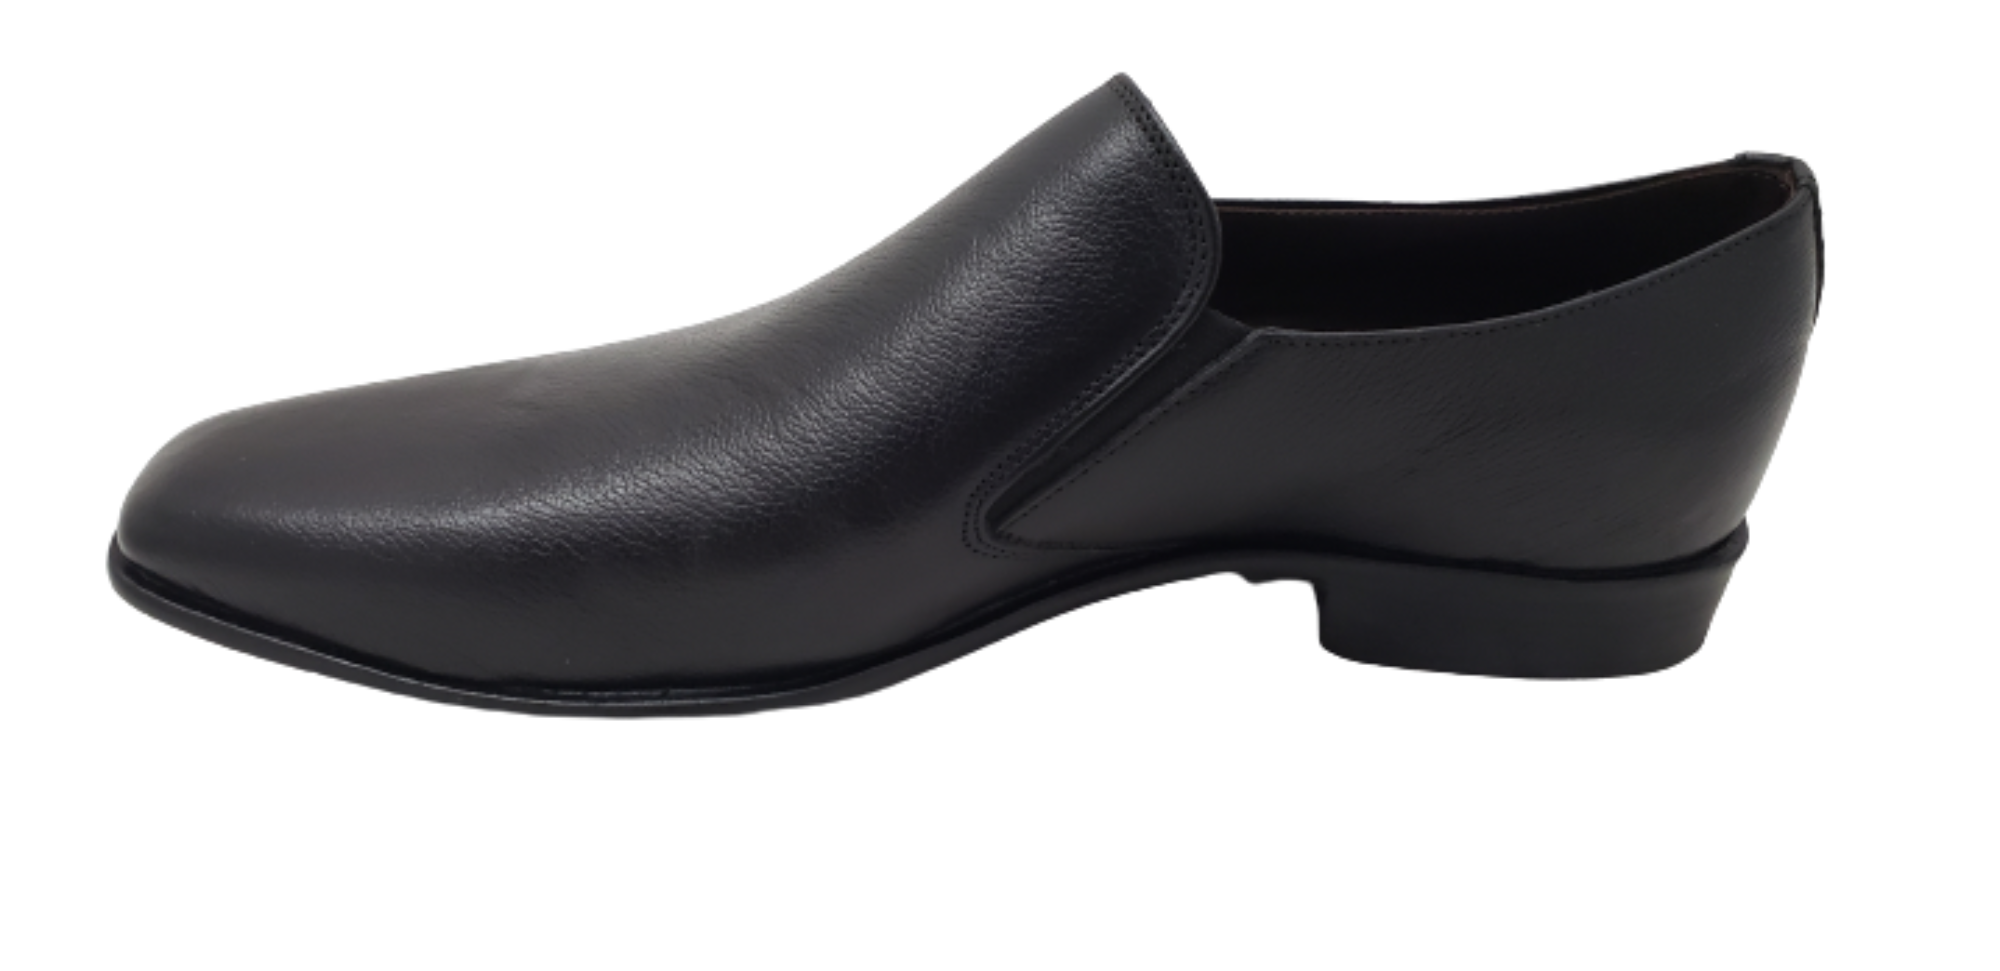 ALFREDO MEN'S BLACK DRESS SLIP ON SHOES WITH RUBBER SOLE - 25012R